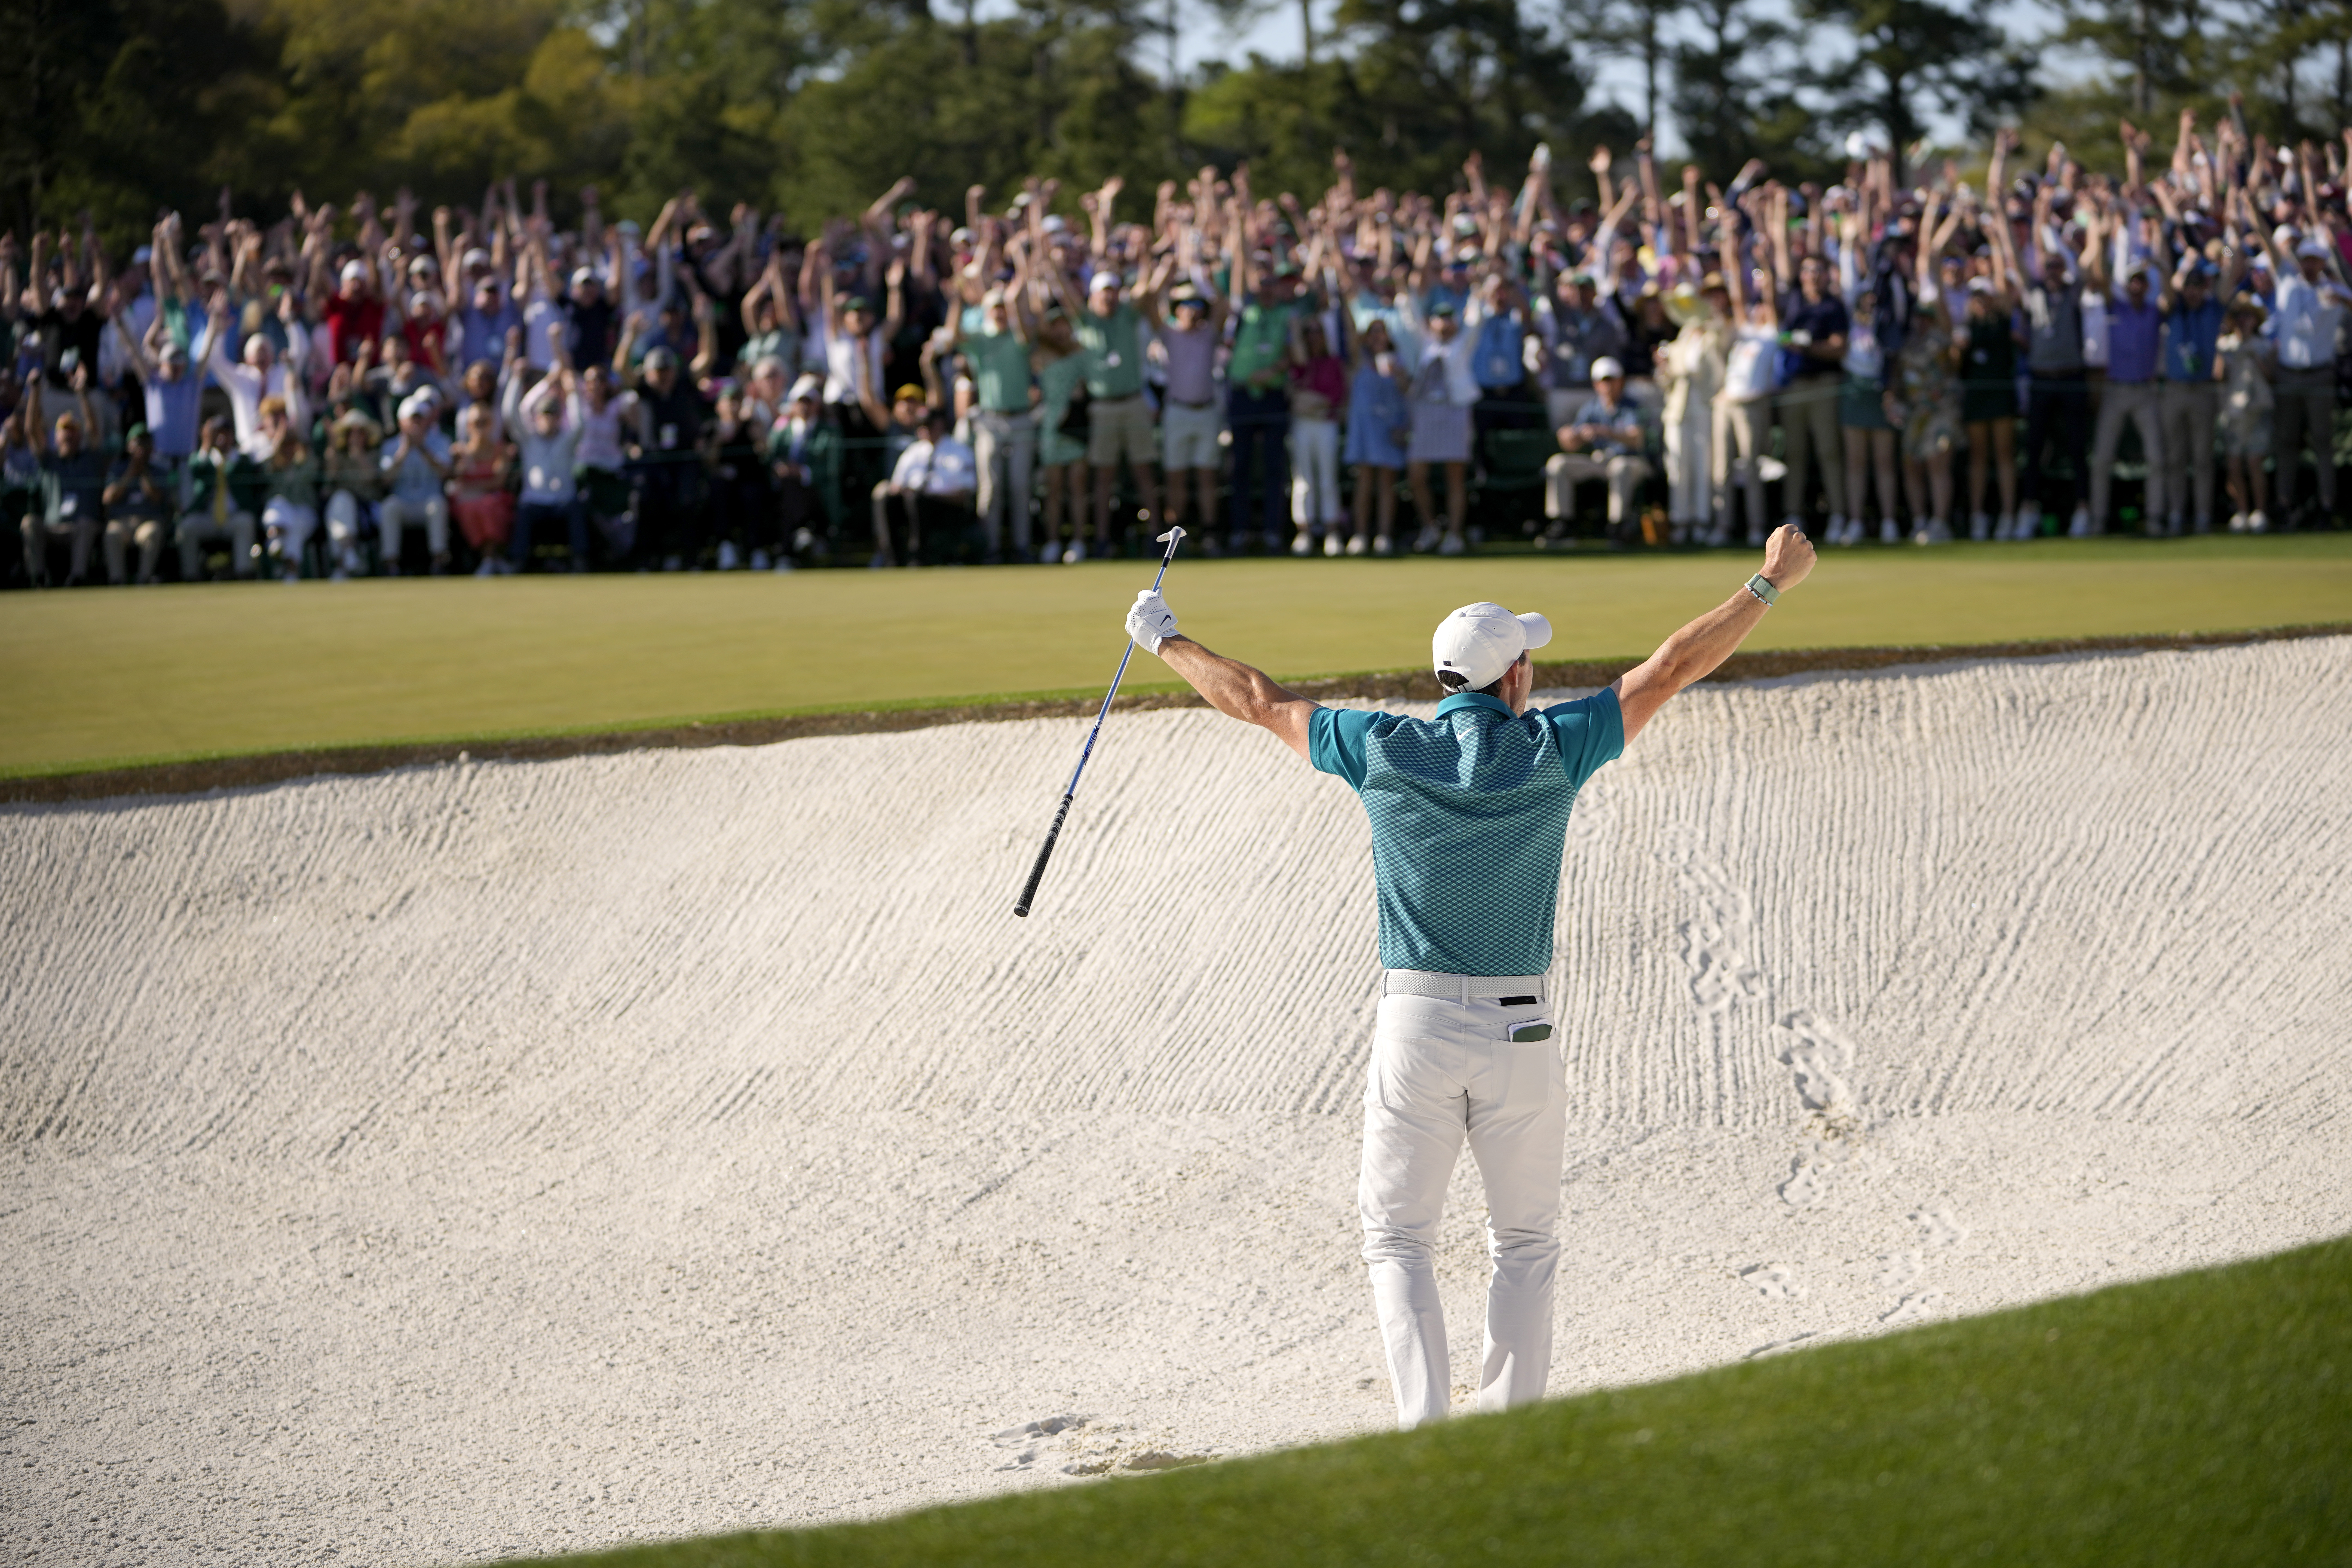 Golf fans crushed Nick Faldo for spoiling Rory McIlroy’s amazing birdie on 18 at the Masters